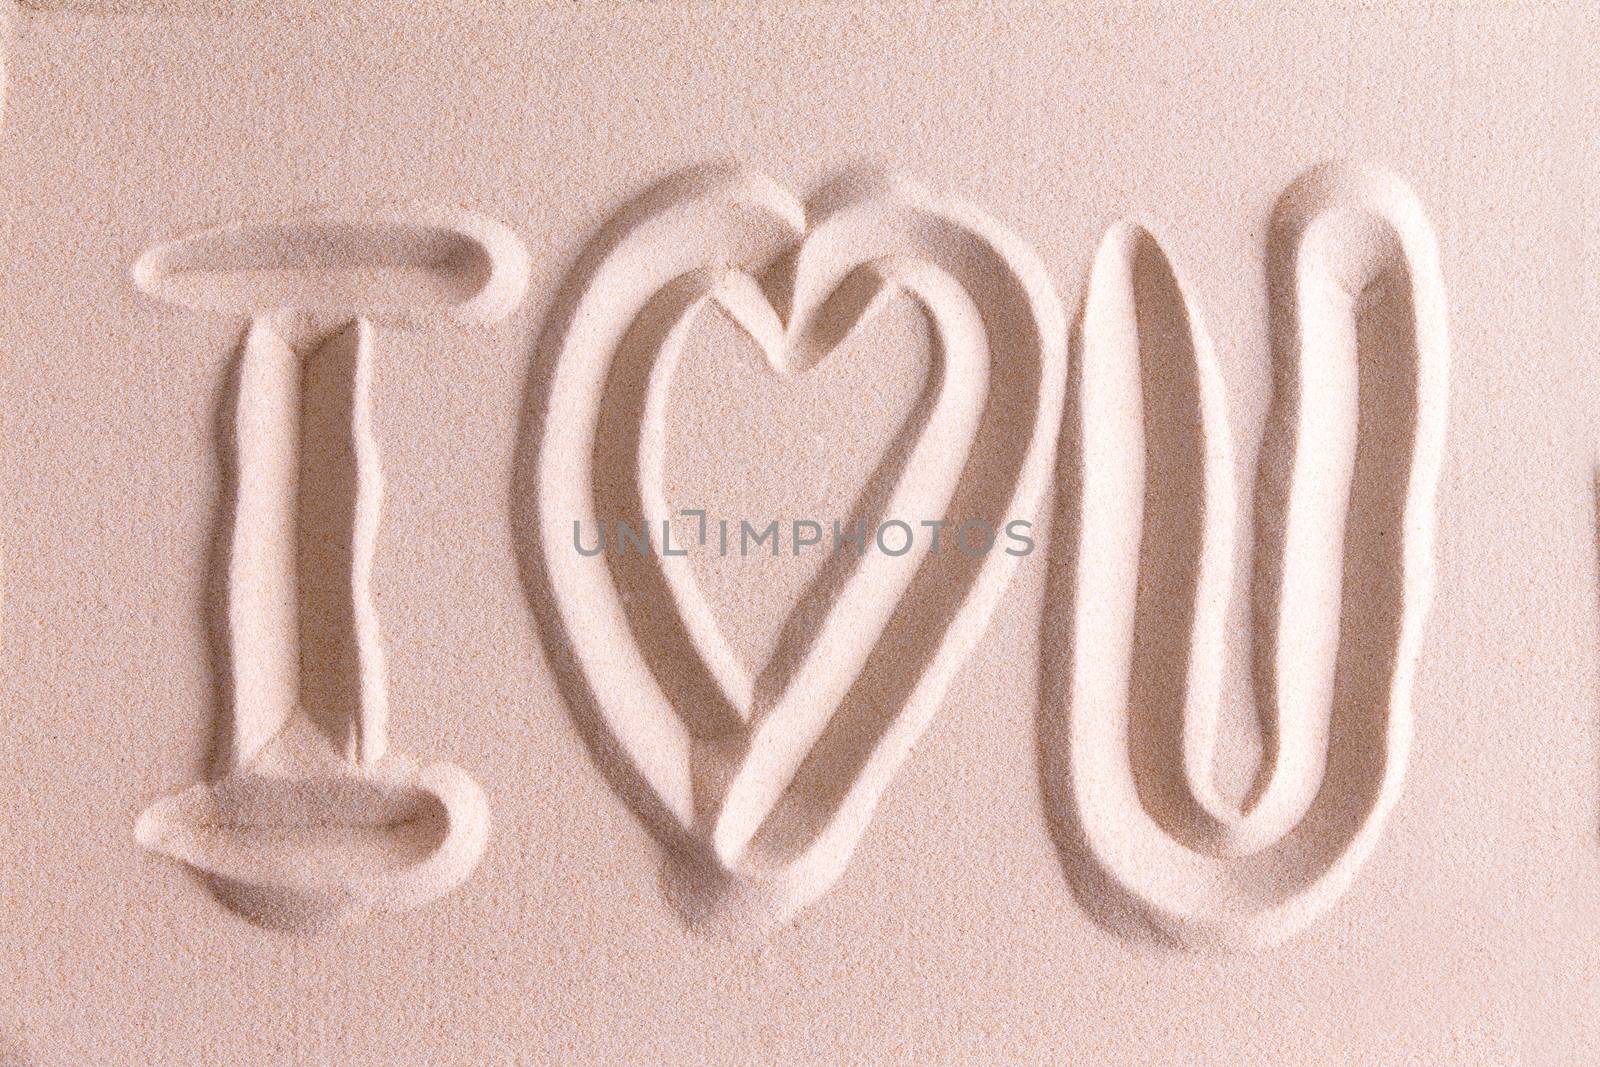 I Love You drawn in golden beach sand with a symbolic heart for romance and love for your sweetheart or Valentine in a simple elegant card design or background